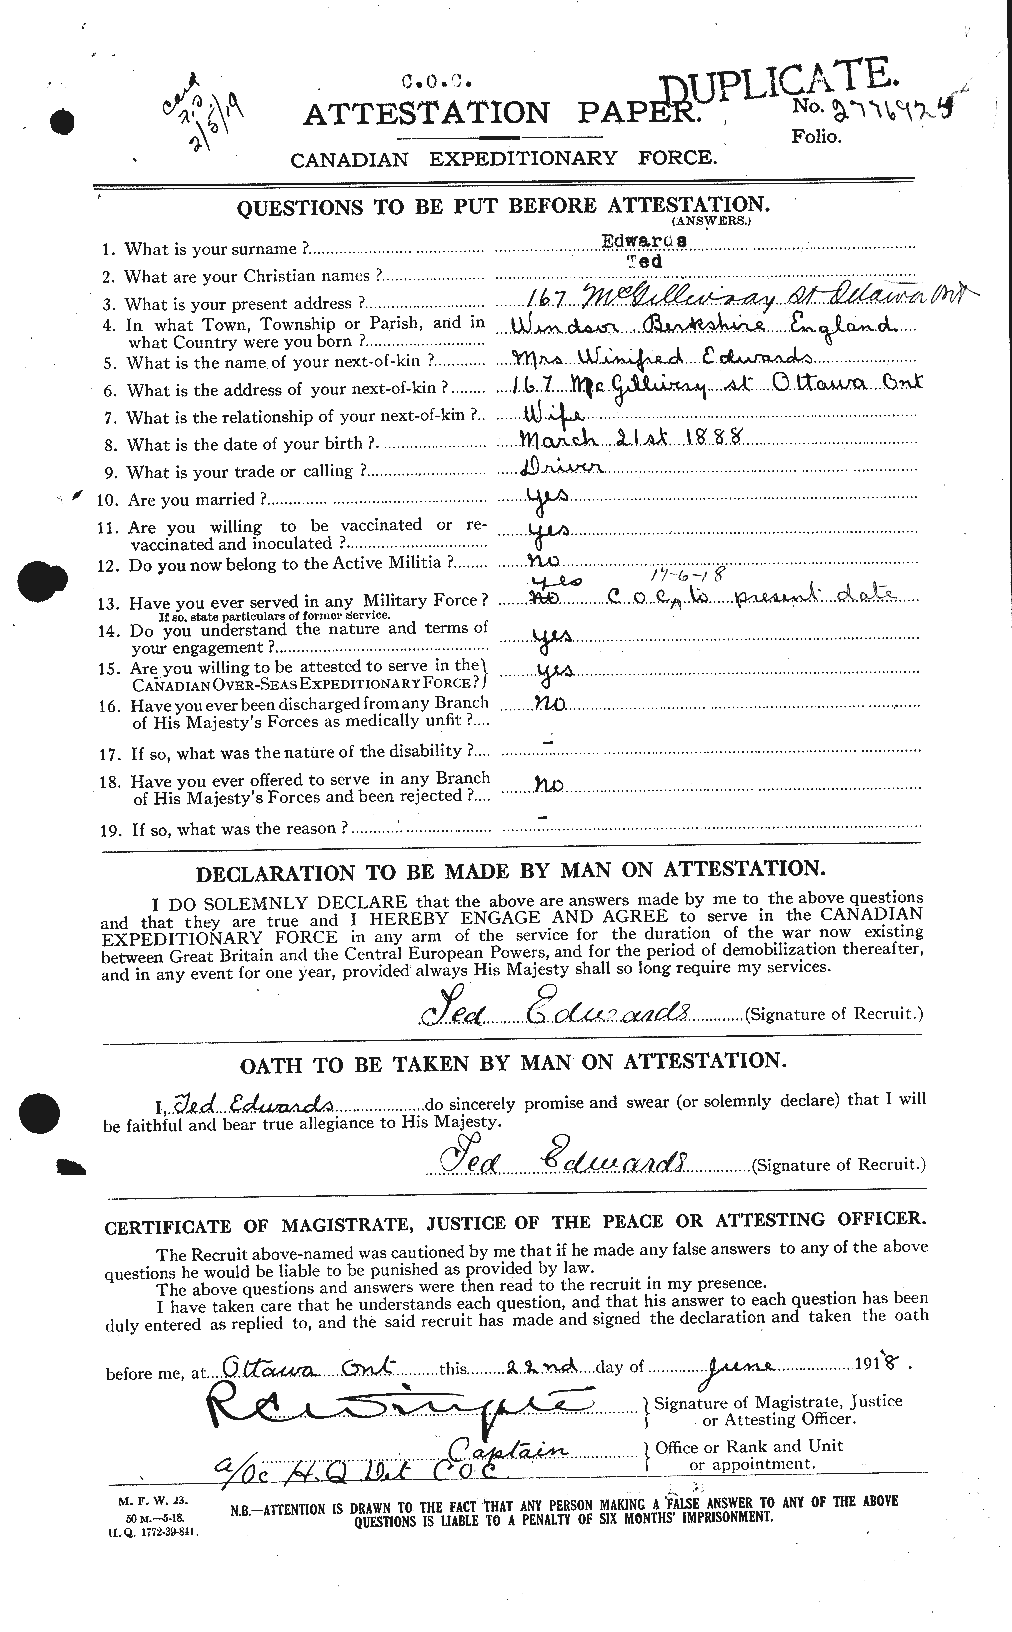 Personnel Records of the First World War - CEF 310328a